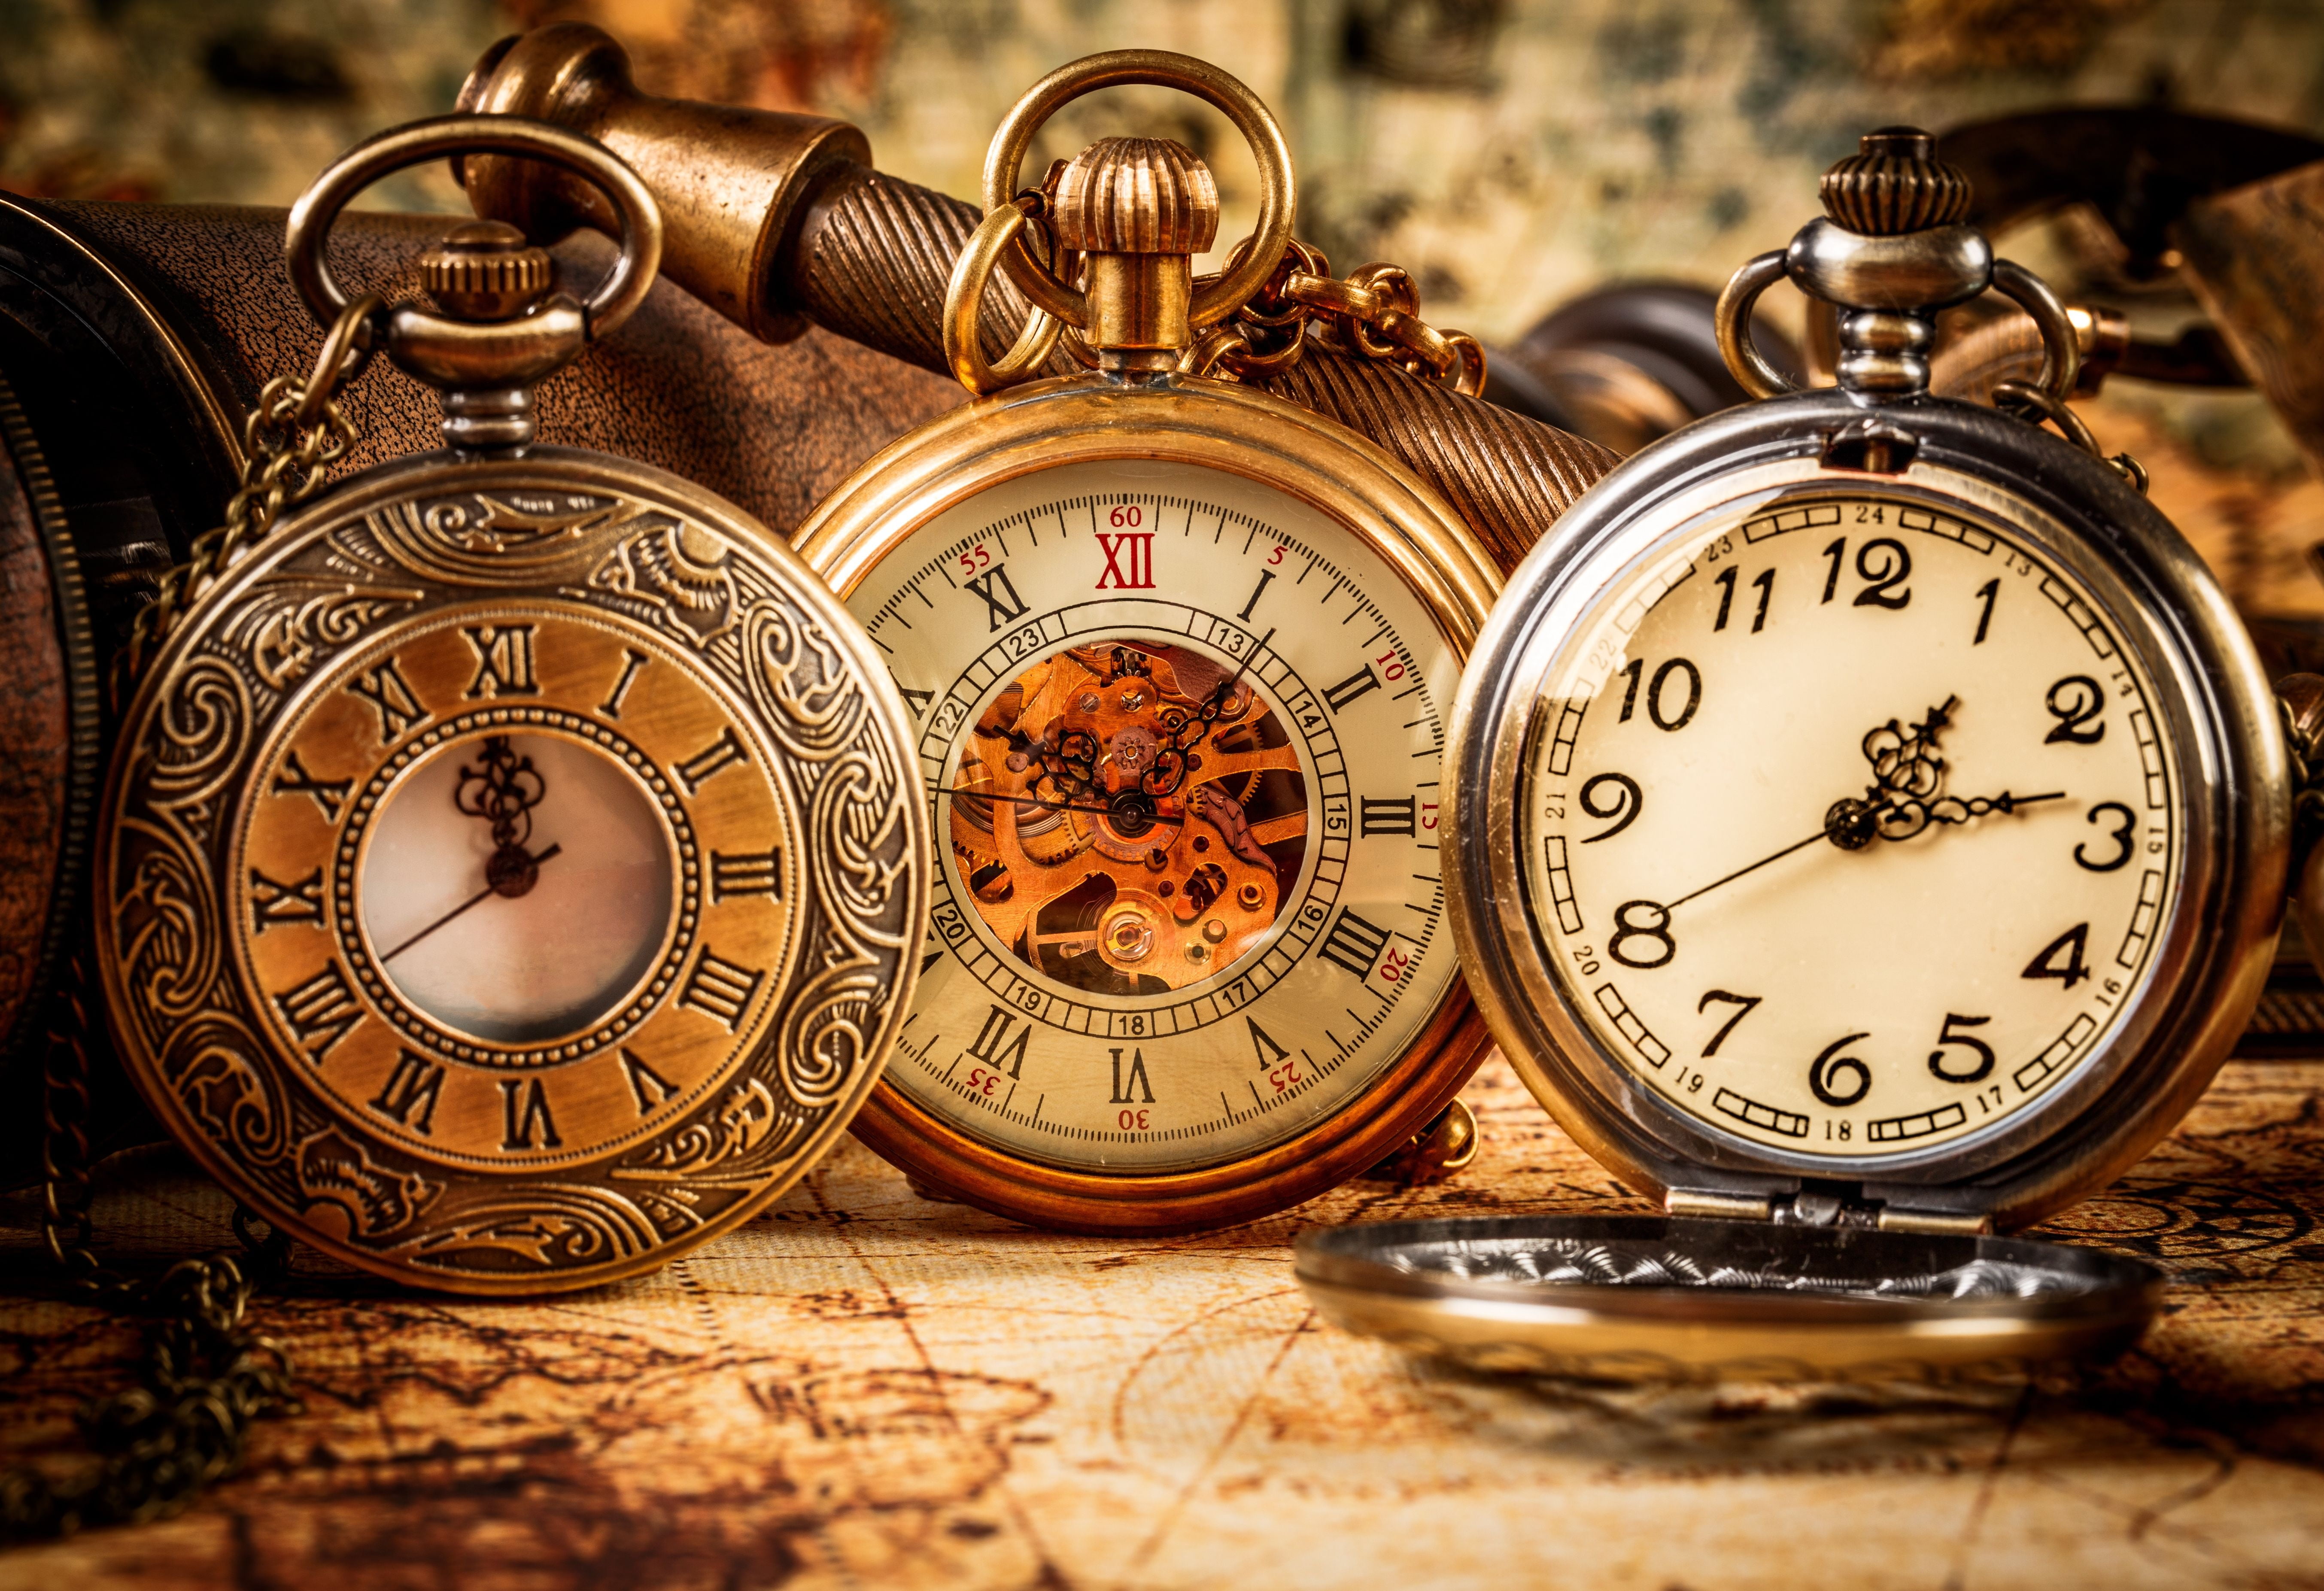 three gold-and-silver-colored pocket watches, division, time zones